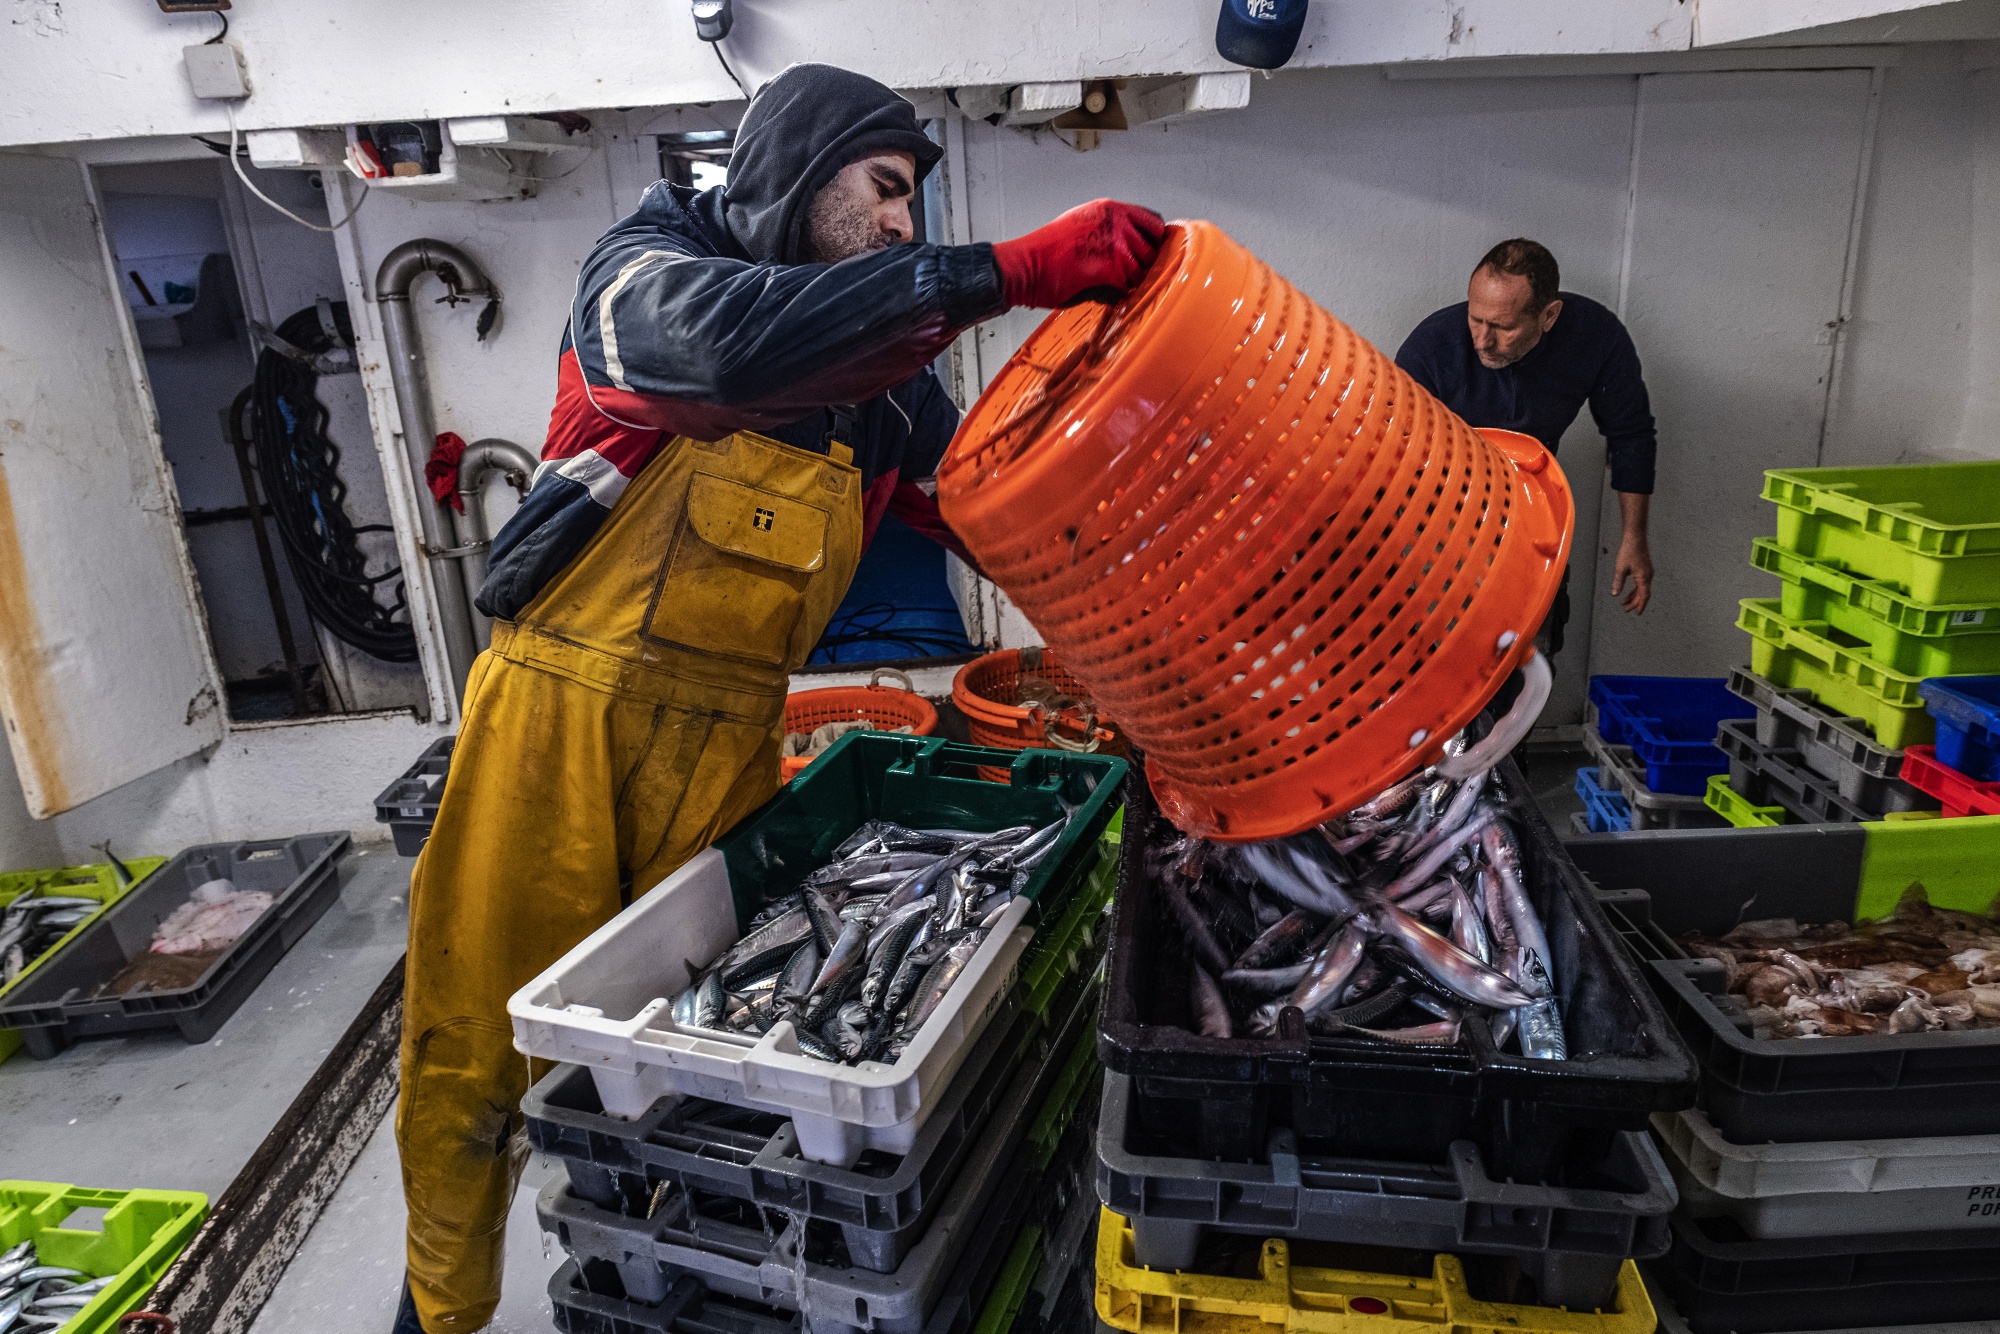 Fishermen sort crates of freshly caught fish at the harbor in Sete, France, on Tuesday, Dec. 1, 2020.&nbsp;